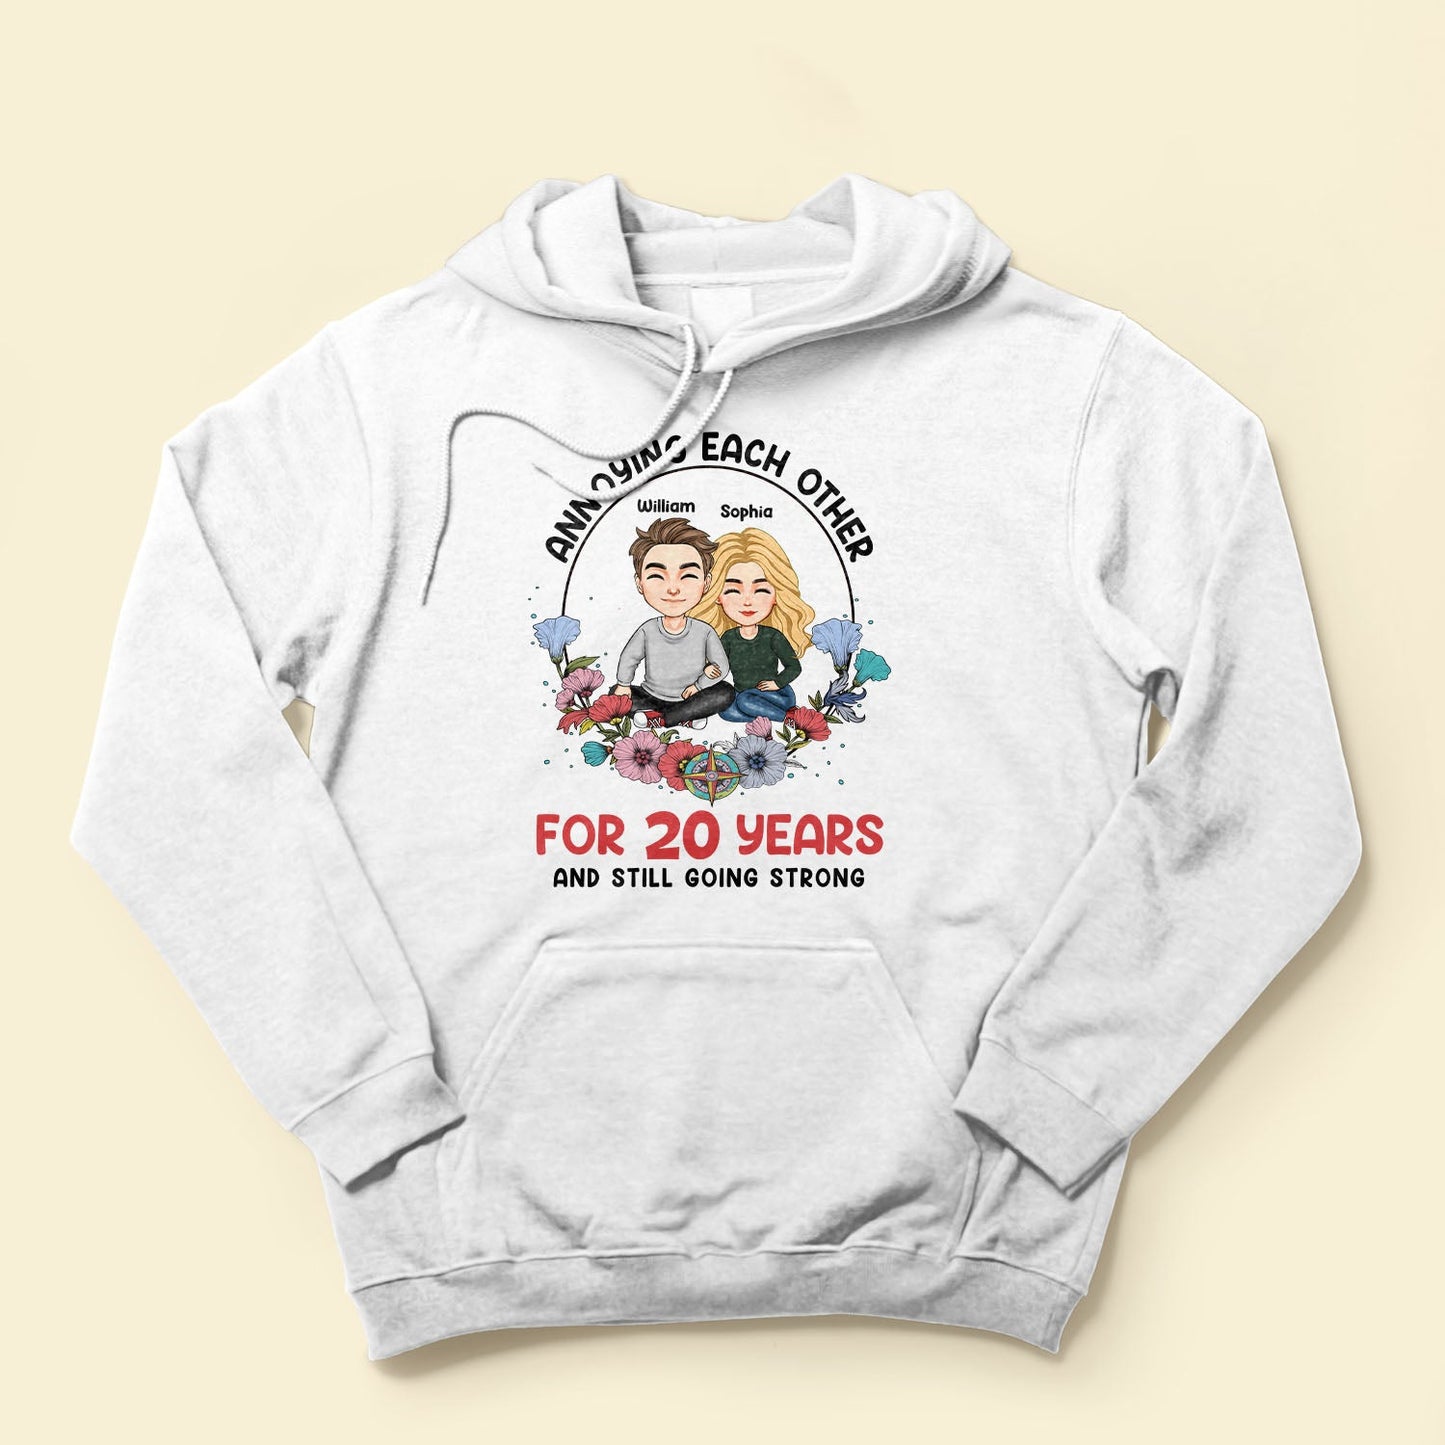 Annoying Each Other For Years And Still Going Strong - Personalized Shirt - Christmas, Valentine'S Day Gift For Couples, Spouses, Wife, Husband, Lover